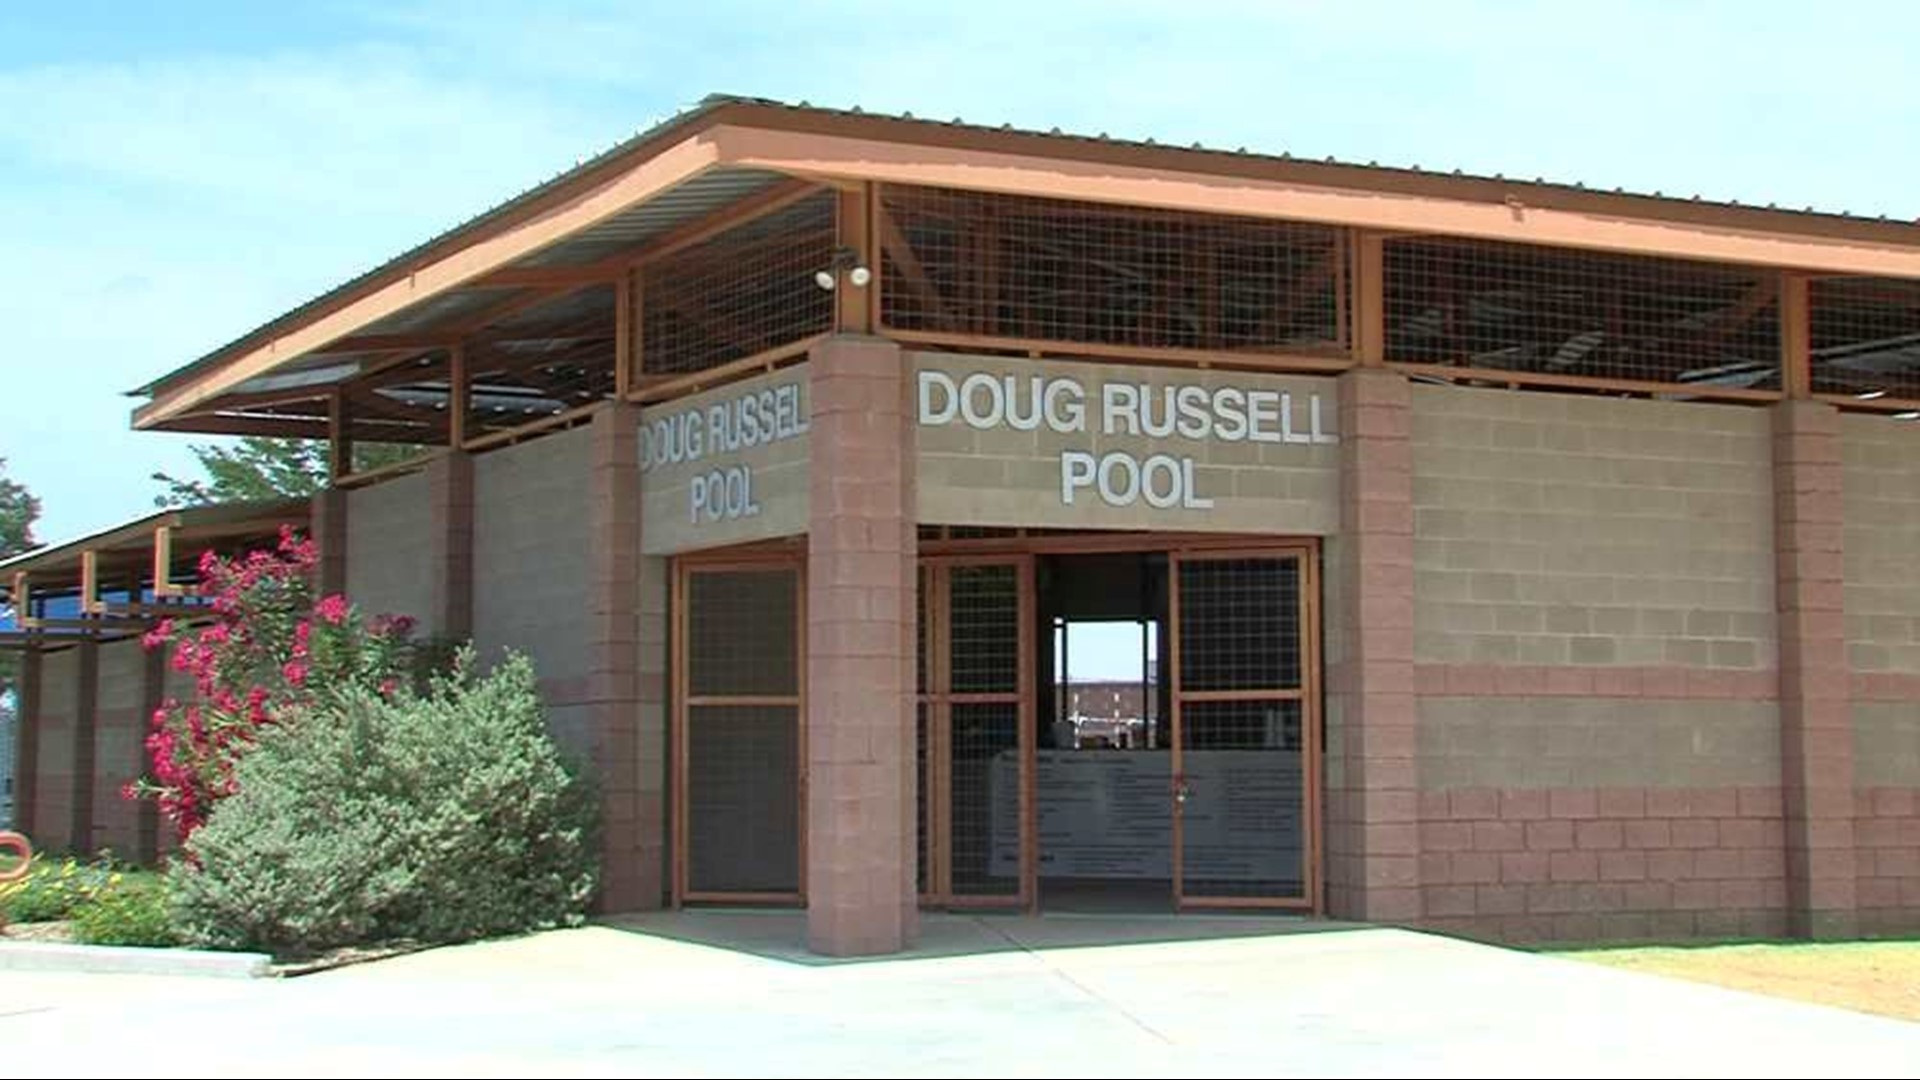 Reservations for the pools and pavilions at Doug Russell will be available starting May 1.